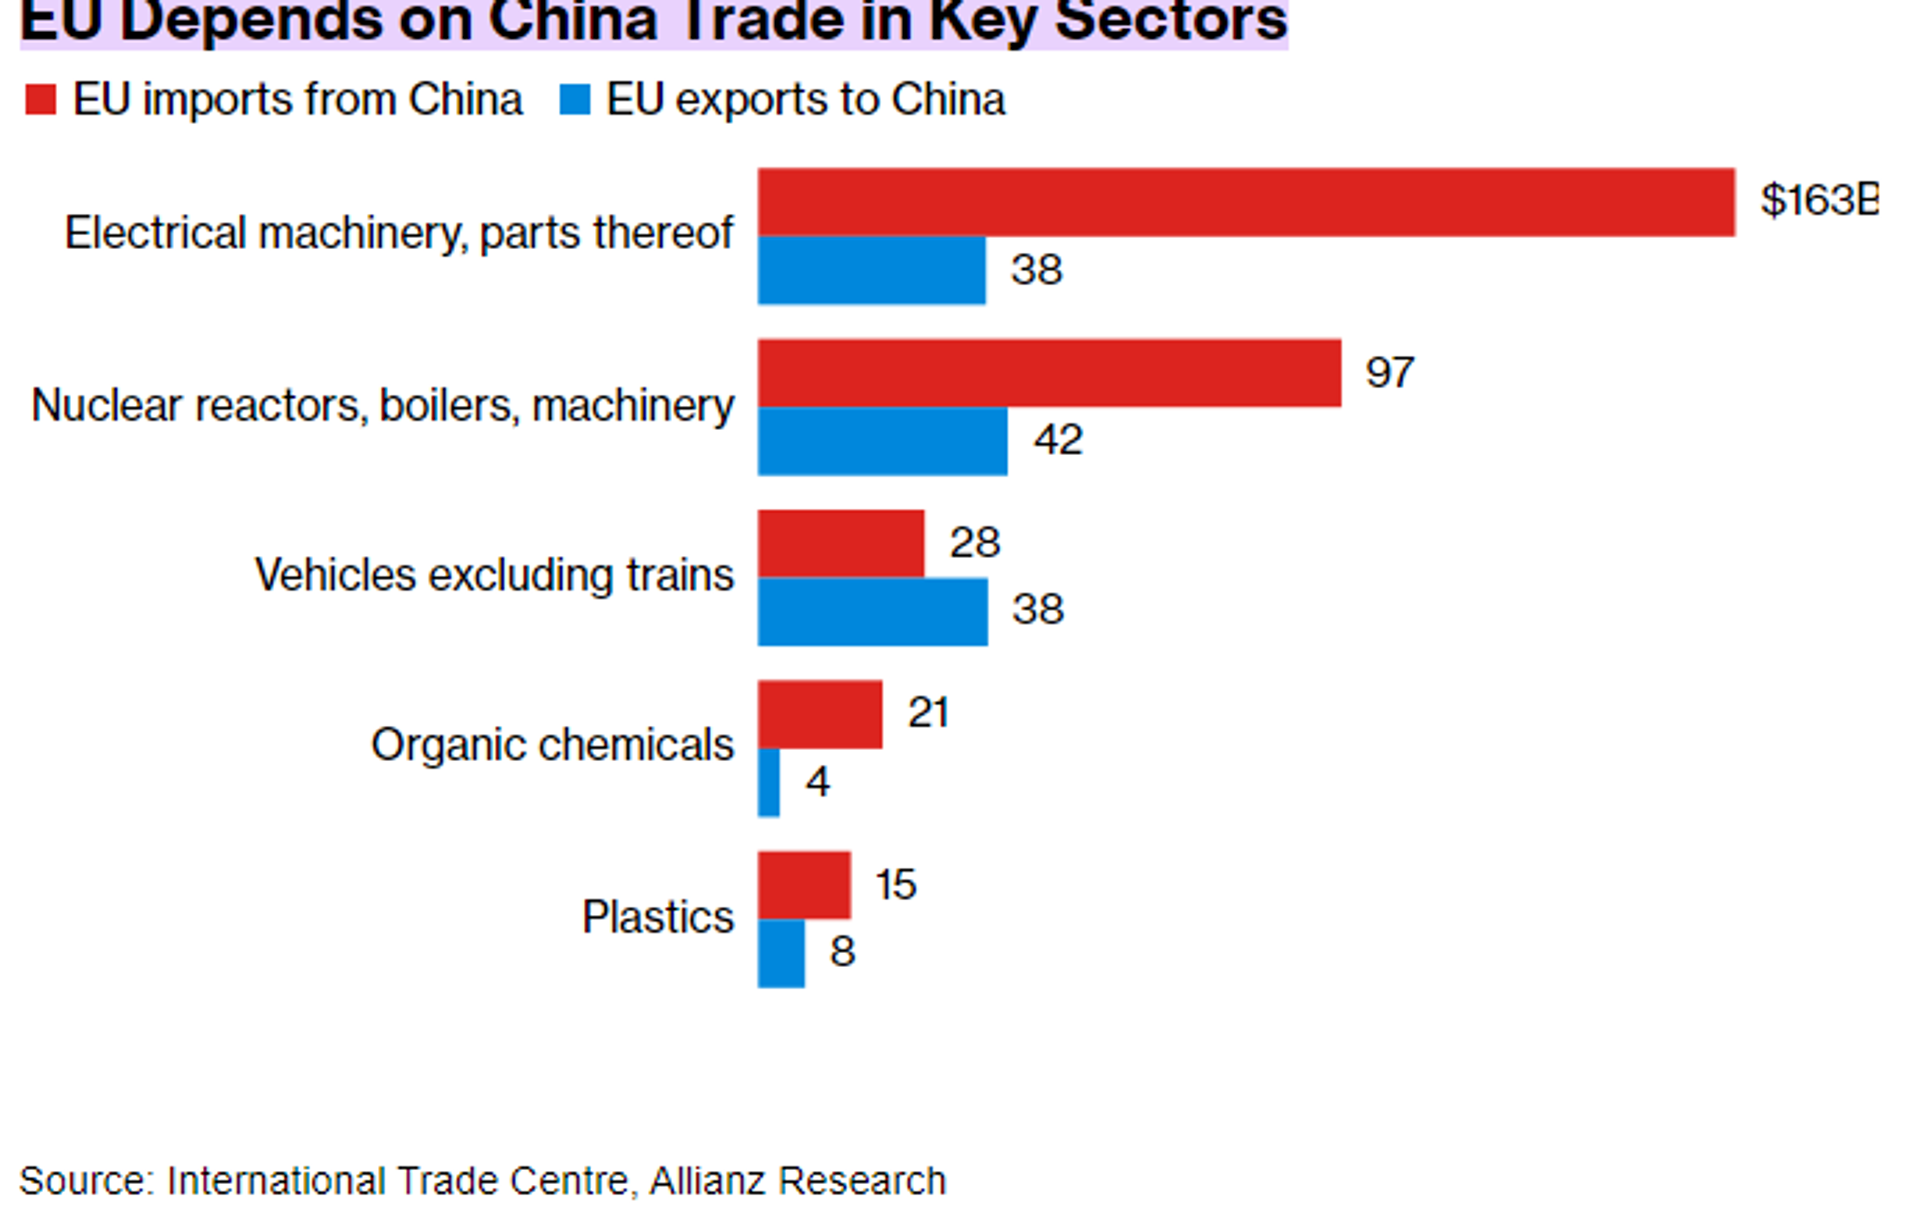 Screenshot of chart by International Trade Centre, Allianz Research, showing key sectors of trade in which the EU depends on China. - Sputnik International, 1920, 07.12.2023